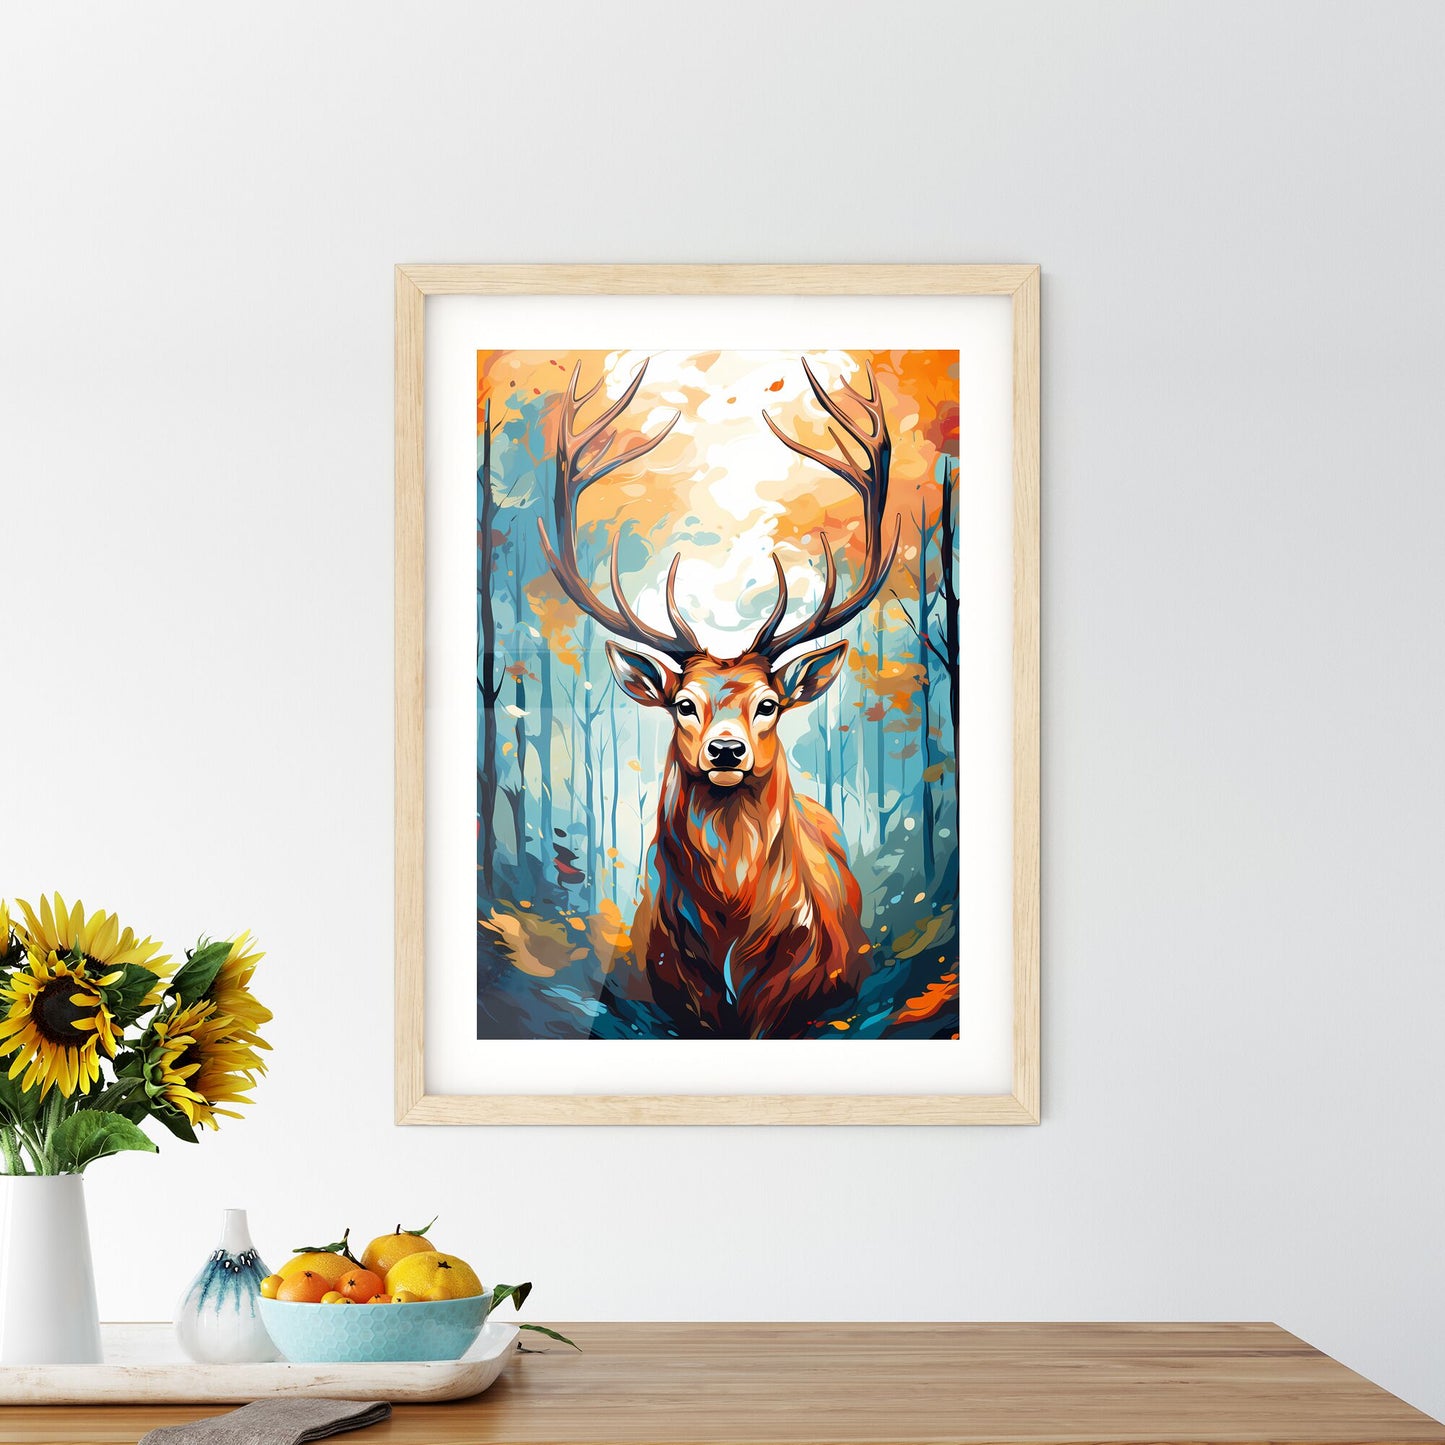 Black Silhouette Stag On White Background - A Painting Of A Deer In The Woods Default Title